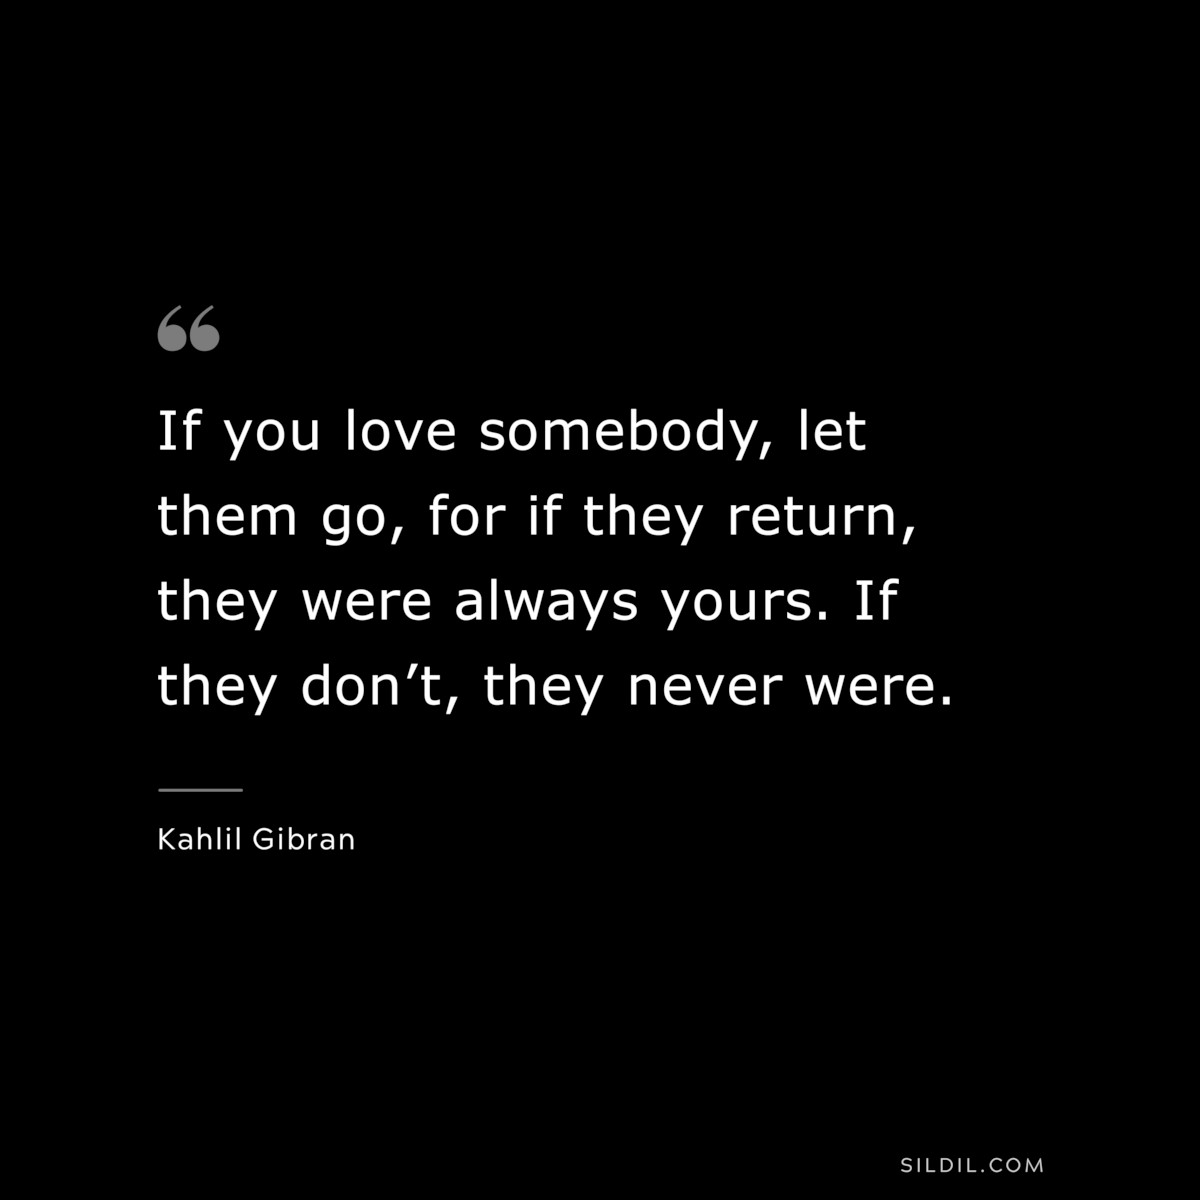 If you love somebody, let them go, for if they return, they were always yours. If they don’t, they never were. ― Kahlil Gibran